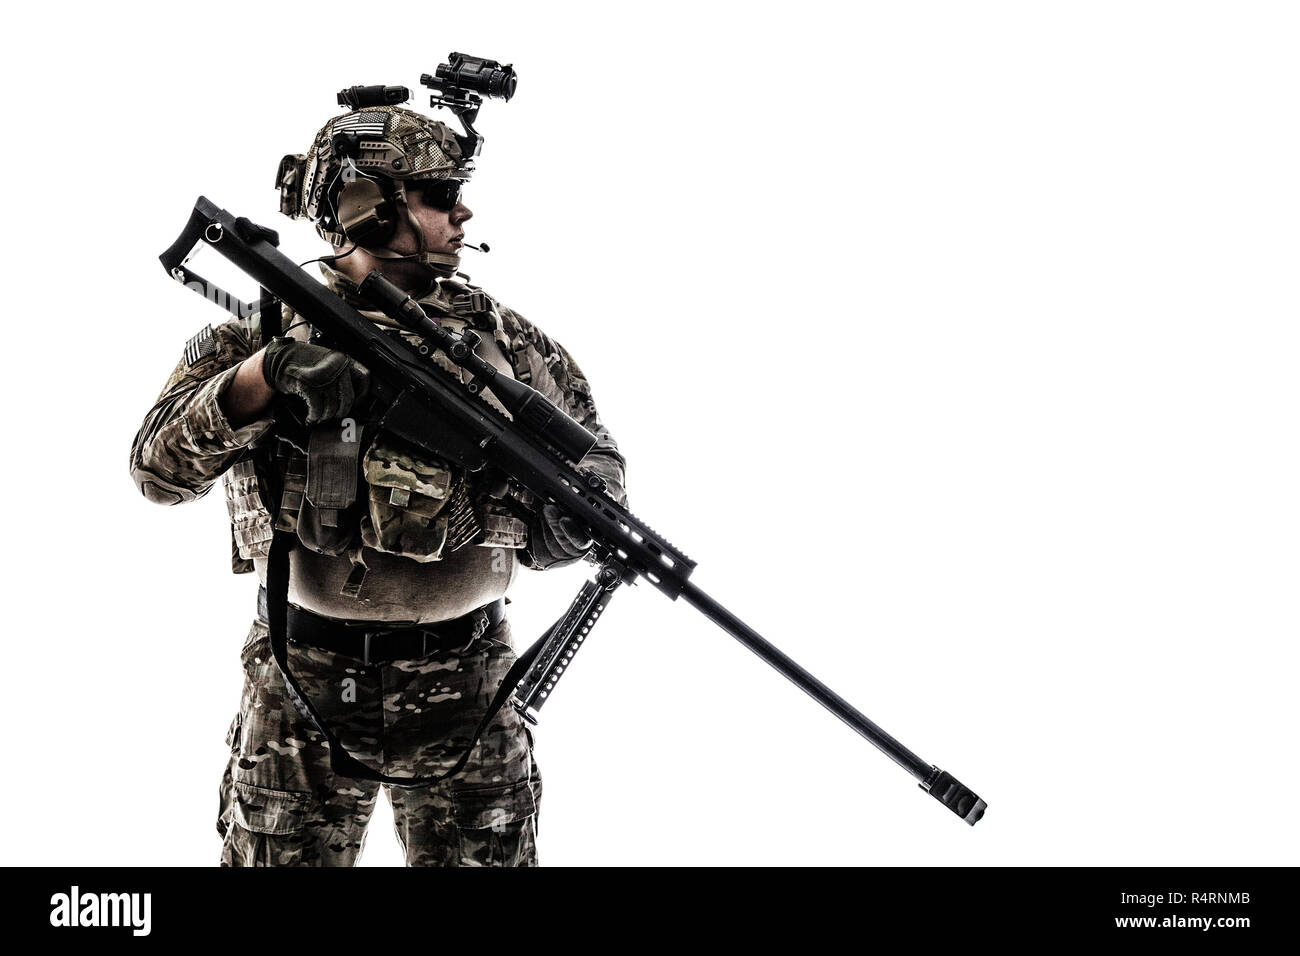 Army Ranger in field Uniforms Stock Photo